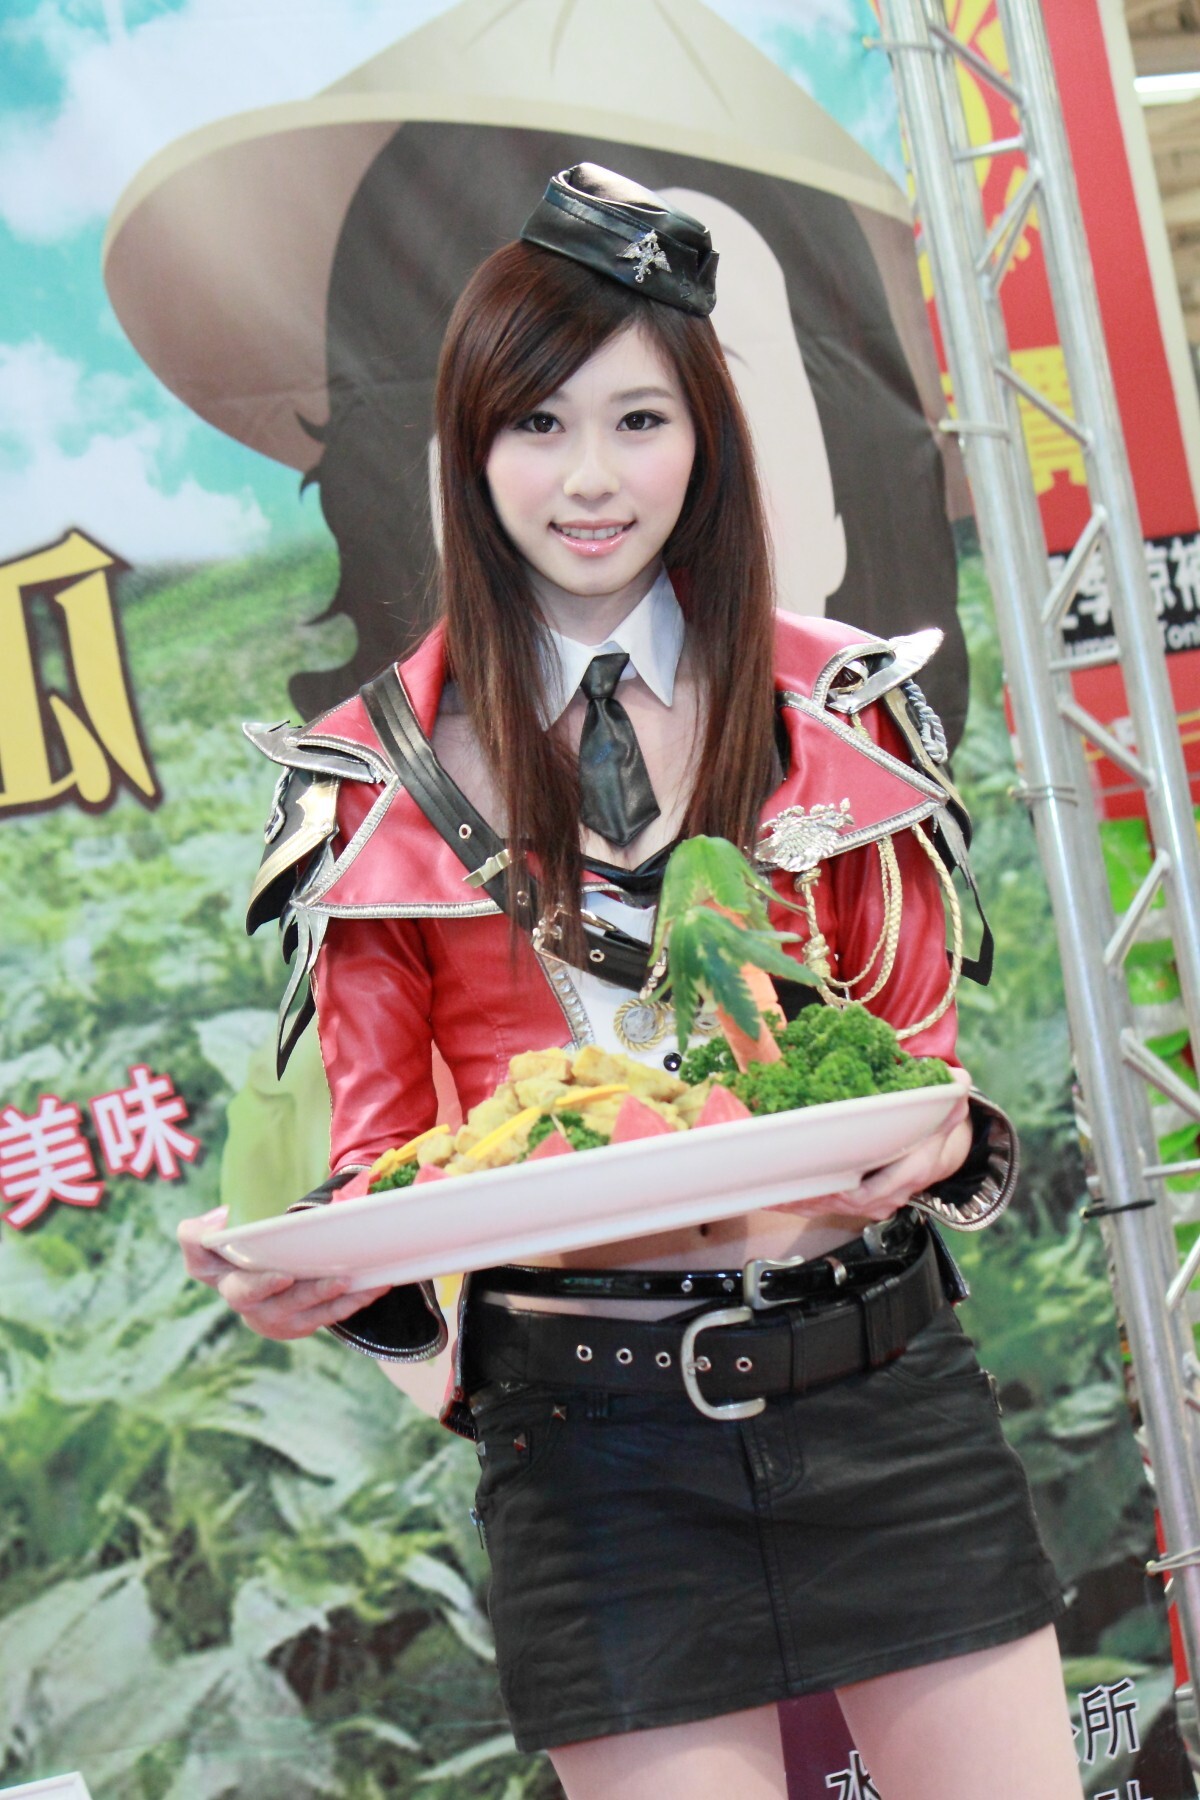 2012 Yaoyao  Apple Photo bookmark book fair Yunlin healthy agriculture week Carrefour